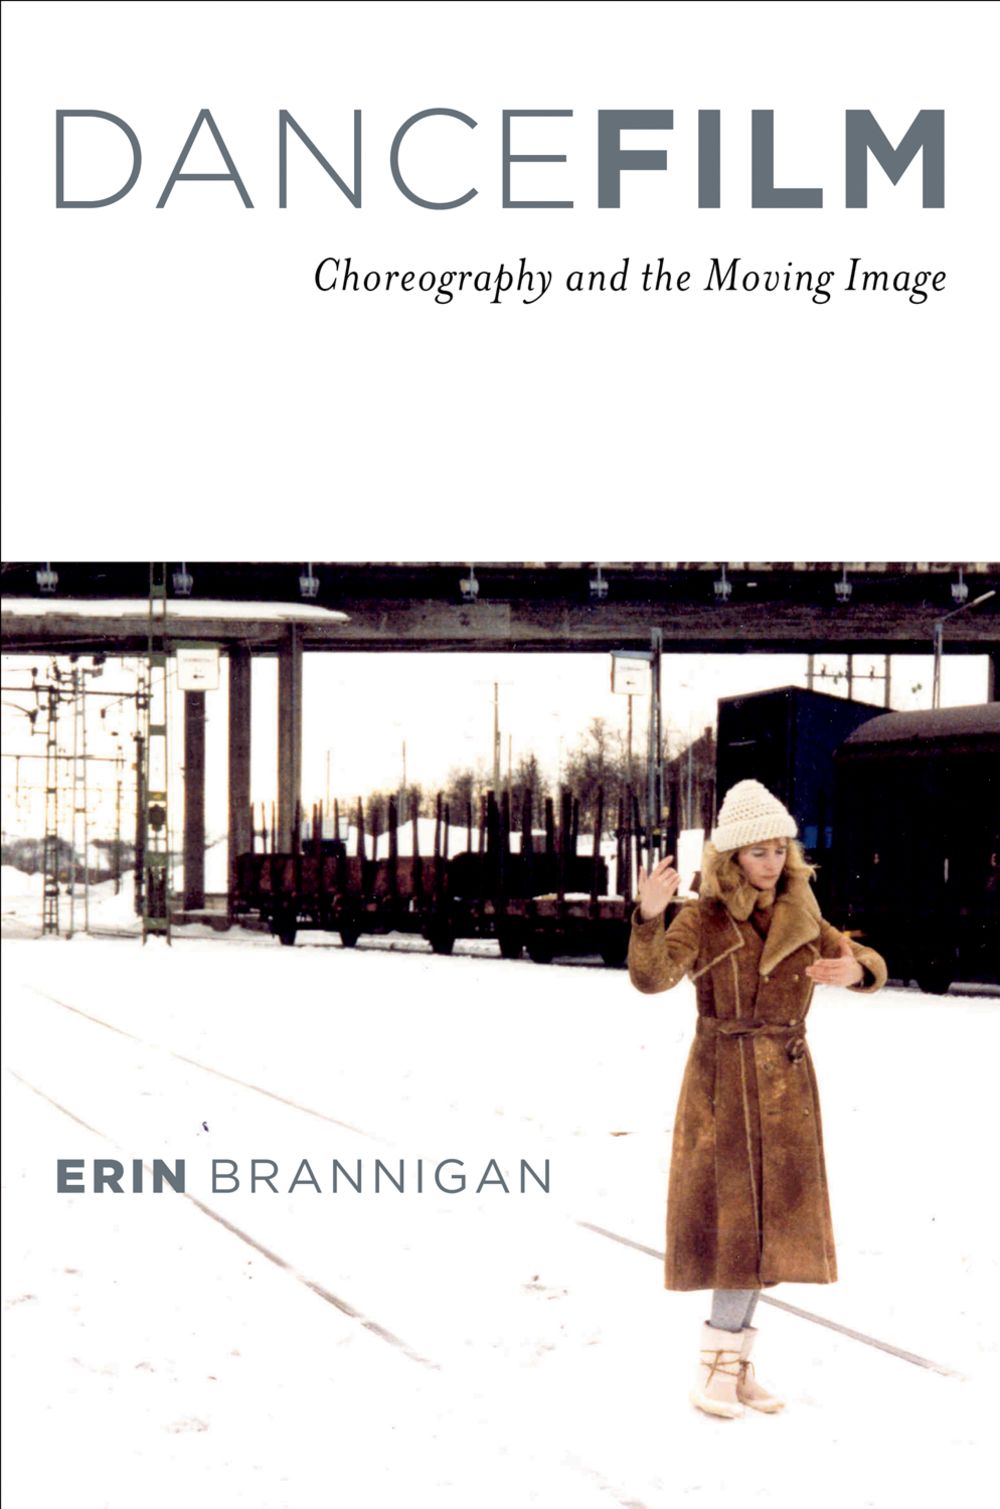 Dancefilm Choreography and the Moving Image